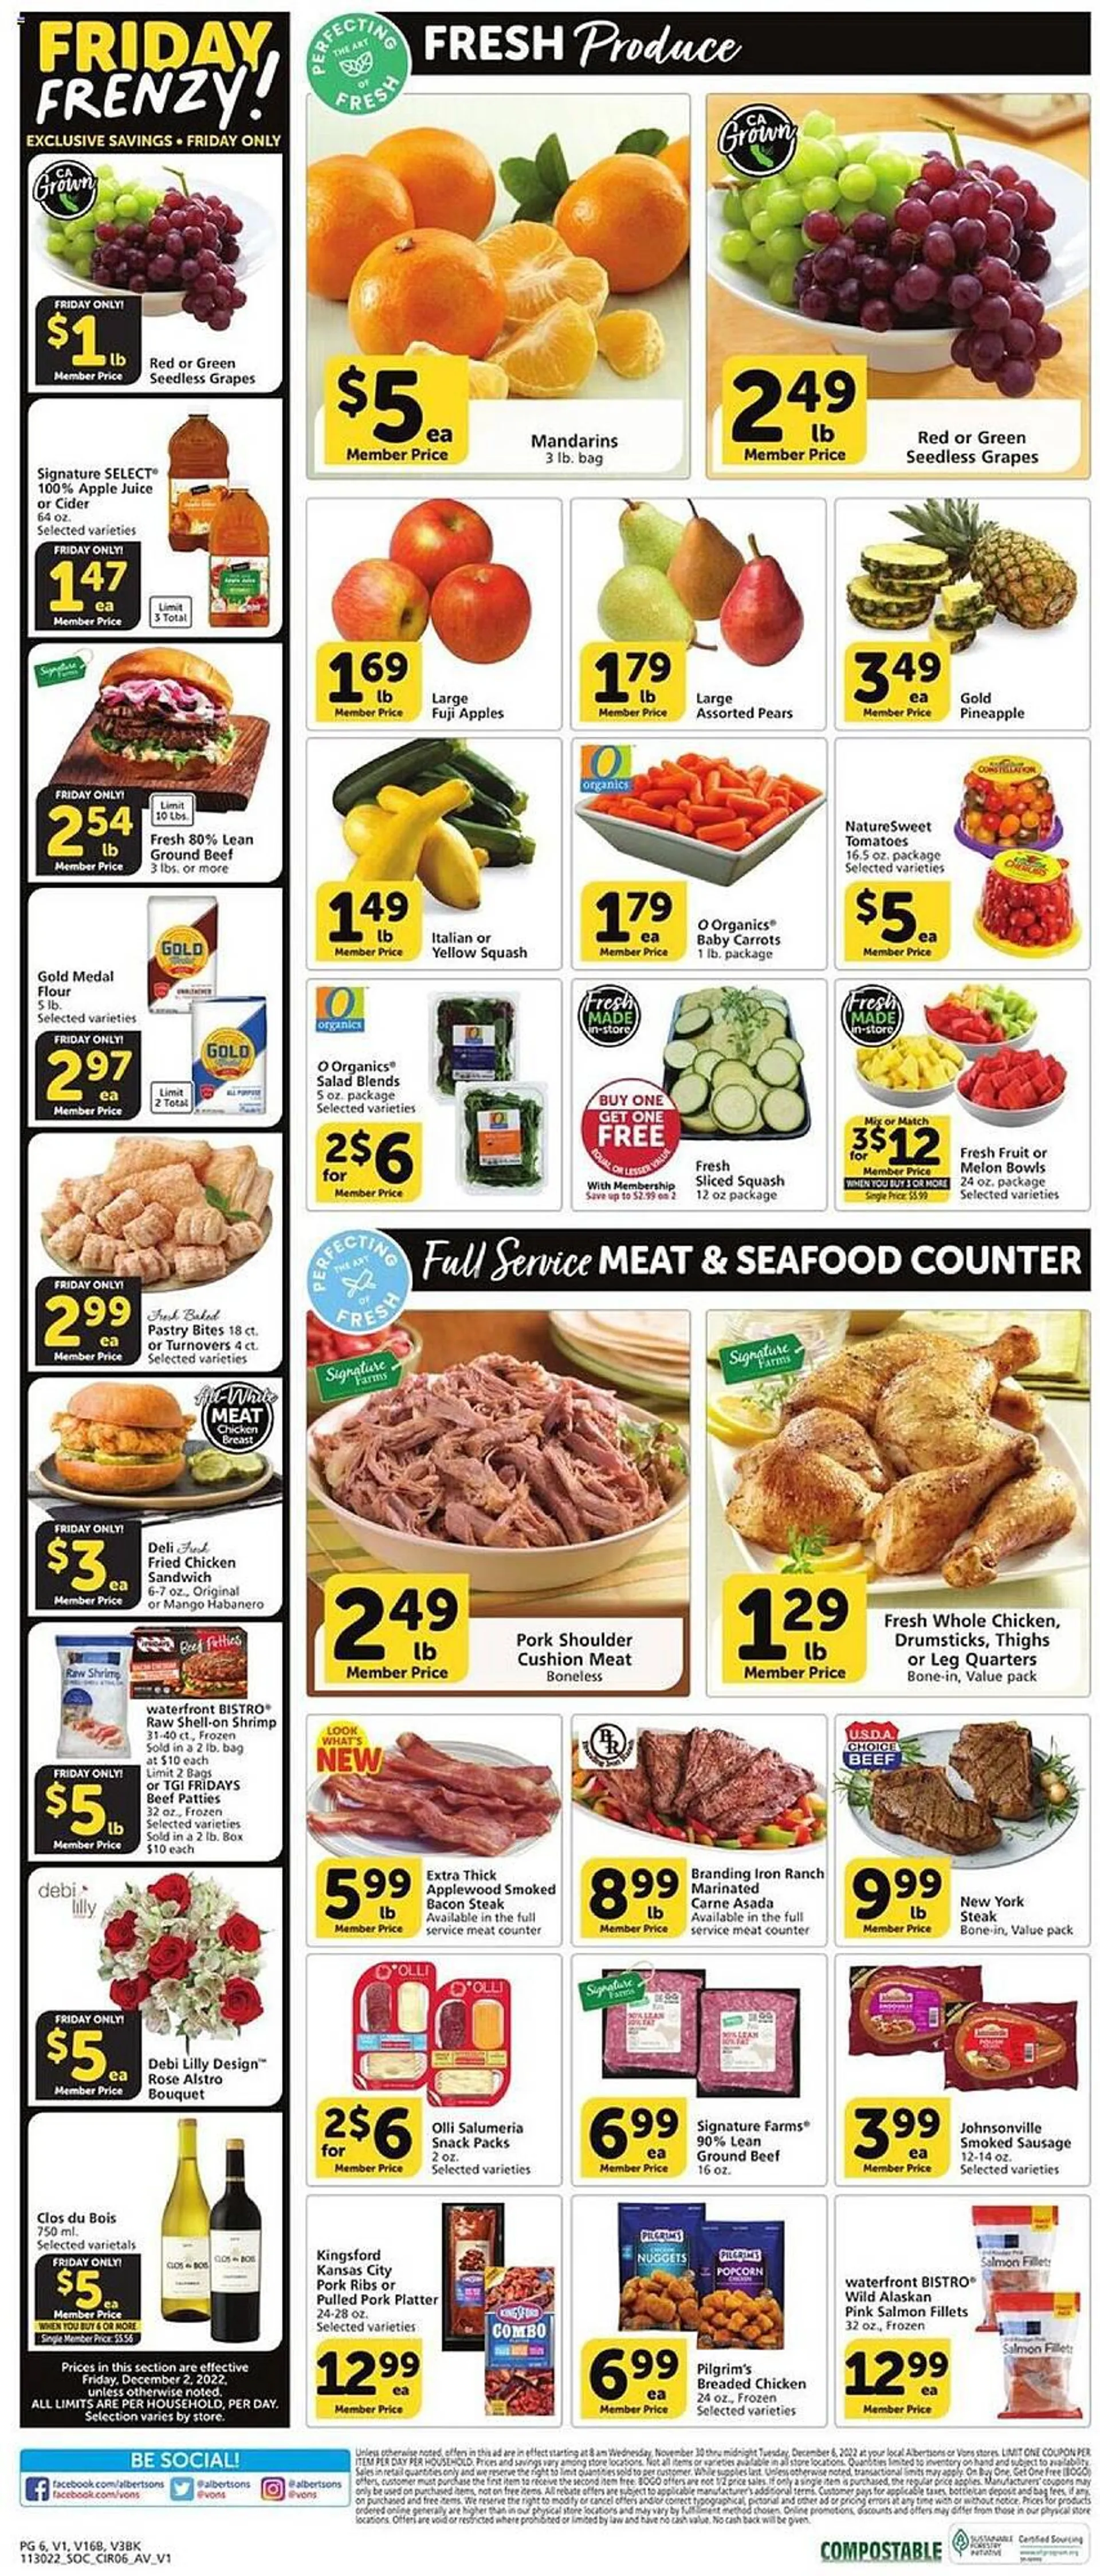 Vons Weekly Ad - 6